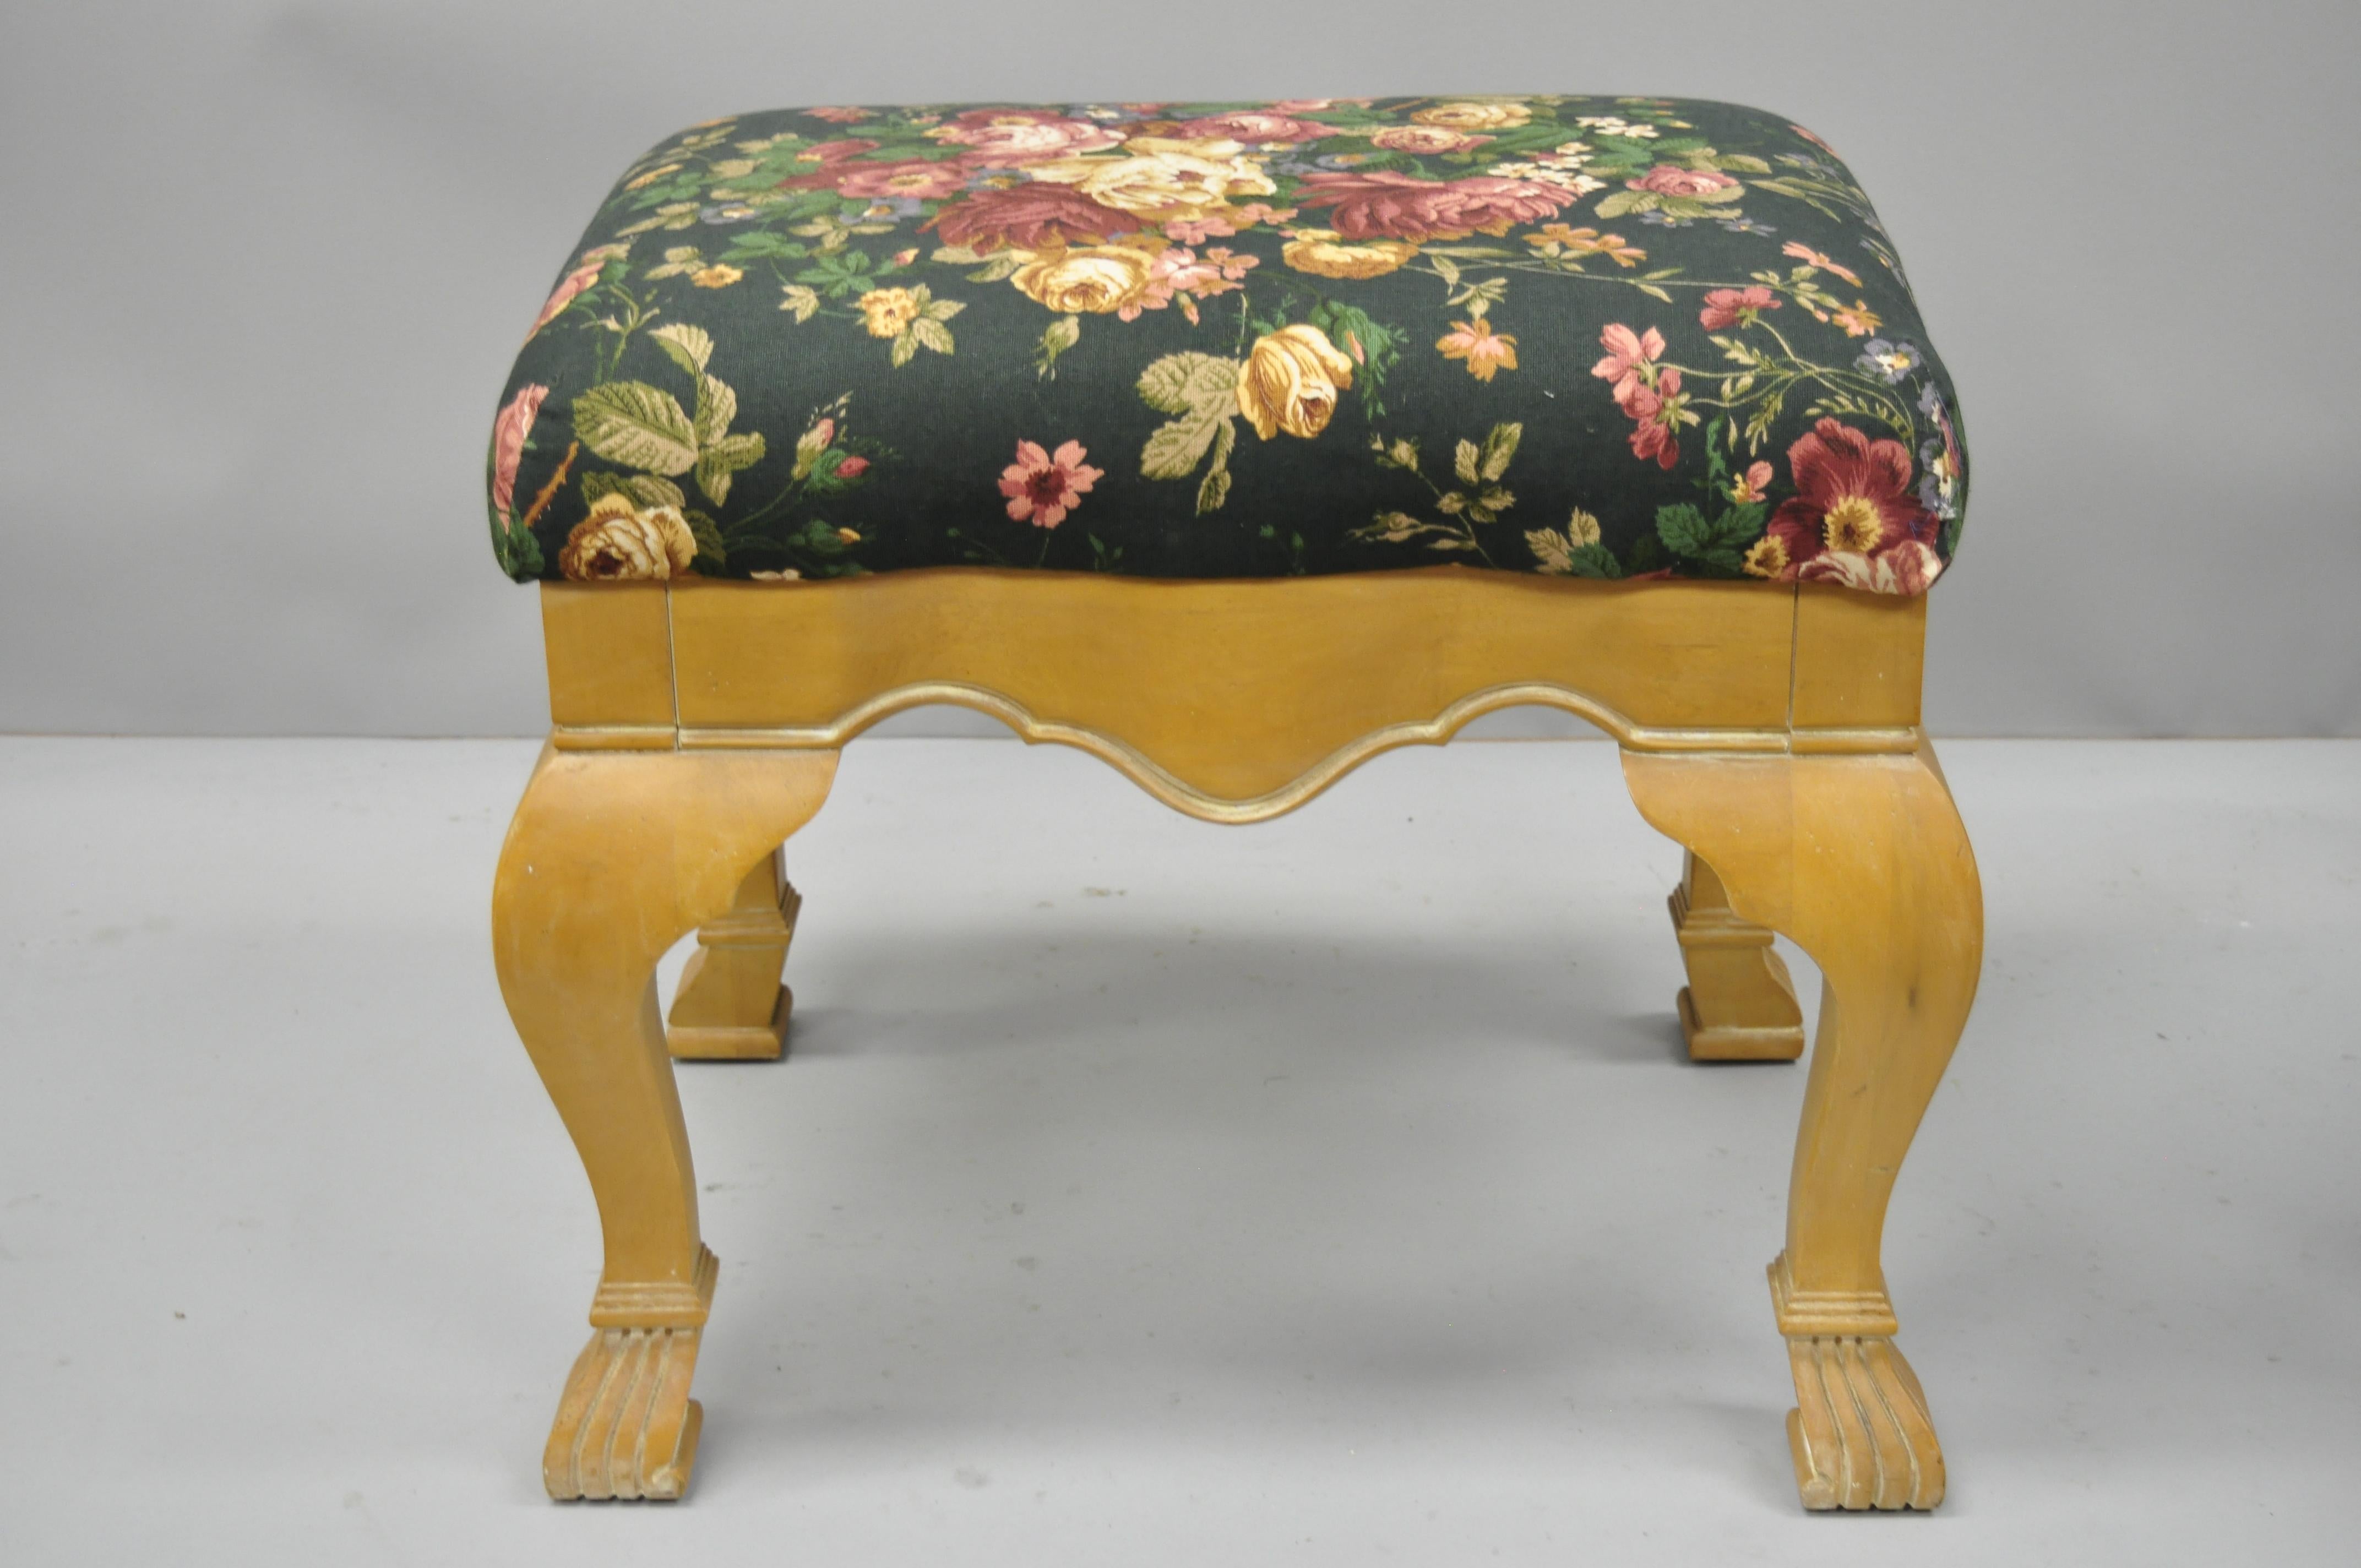 Pair of Country French Style Cabriole Leg Hoof Foot Upholstered Stools Benches For Sale 1